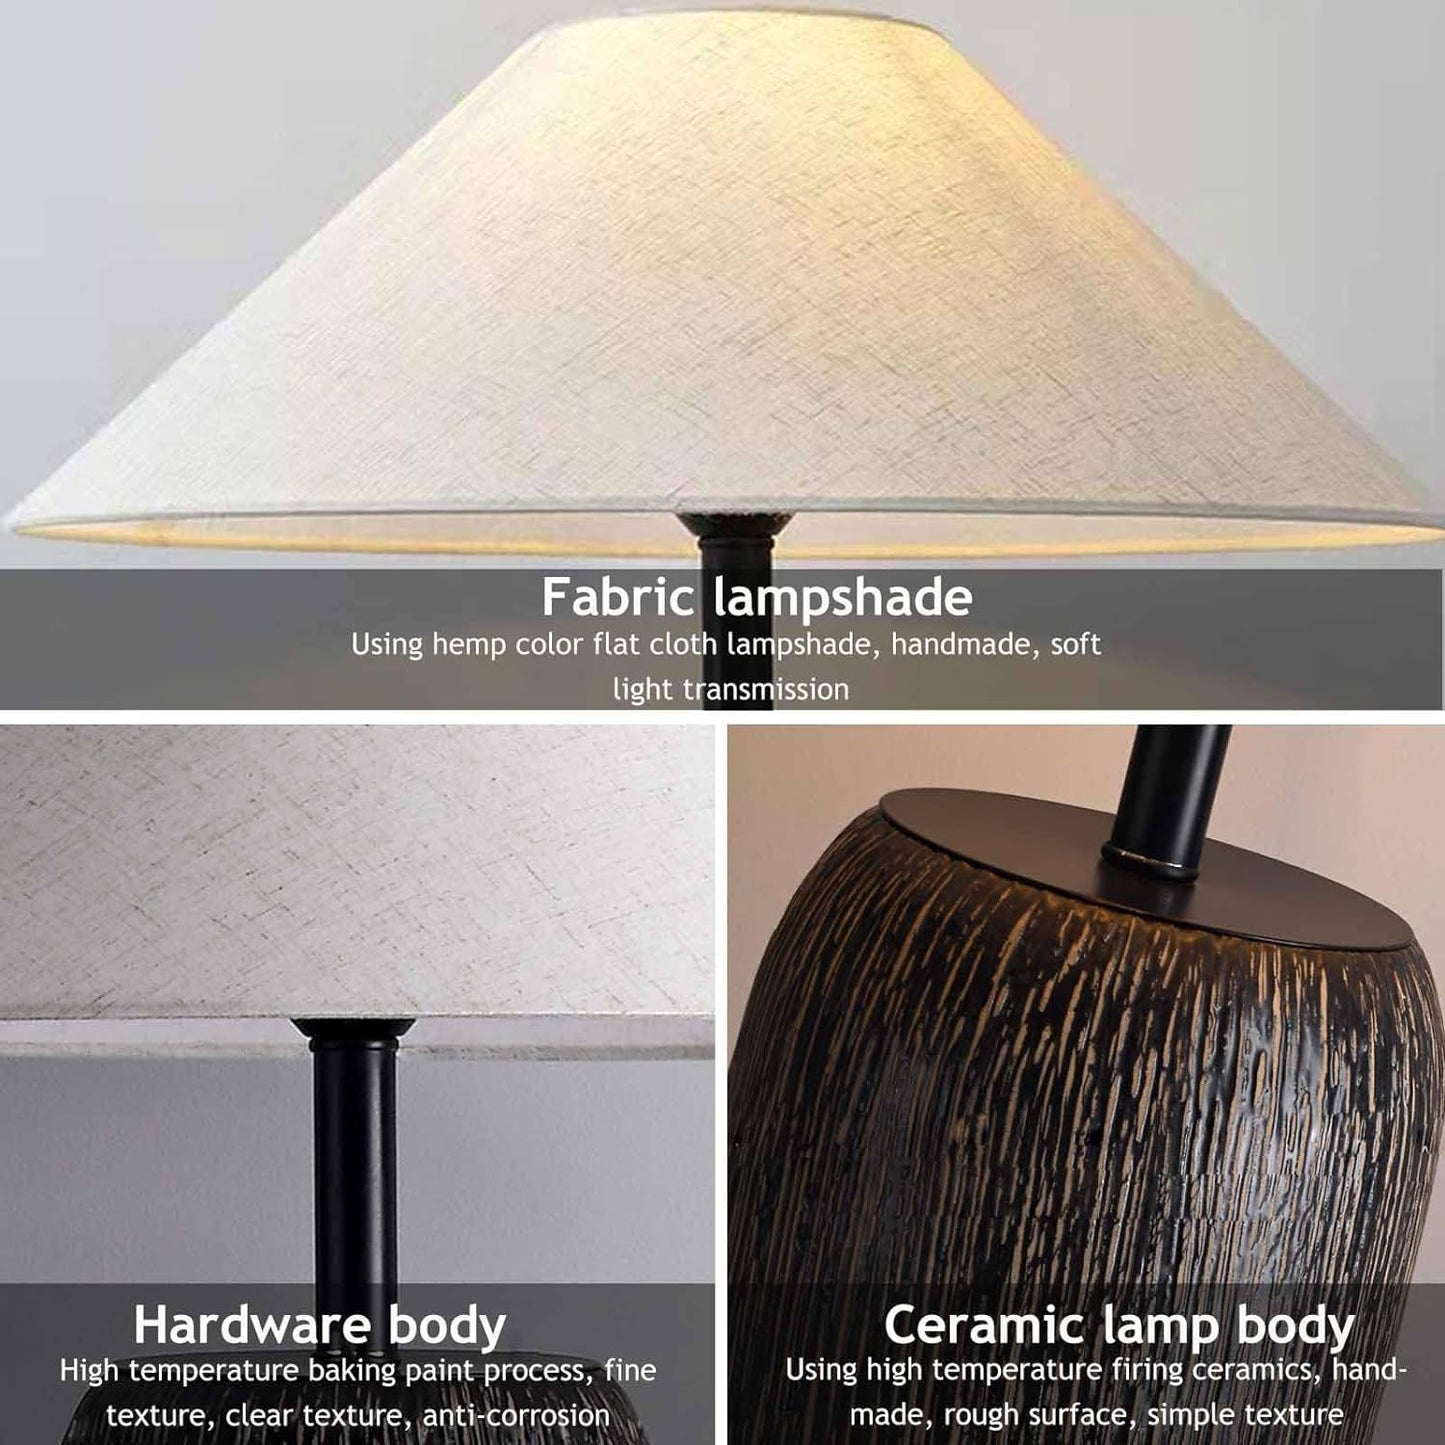 HATUO Vintage Black Ceramic Table Lamp, Rustic Farmhouse Handmade Old Wood Grain Table Lamp, American Imitation Branch Lamp Body with Fabric Shade Bedside Lamp for Living Room Bedroom (D23.6*H43.3IN)